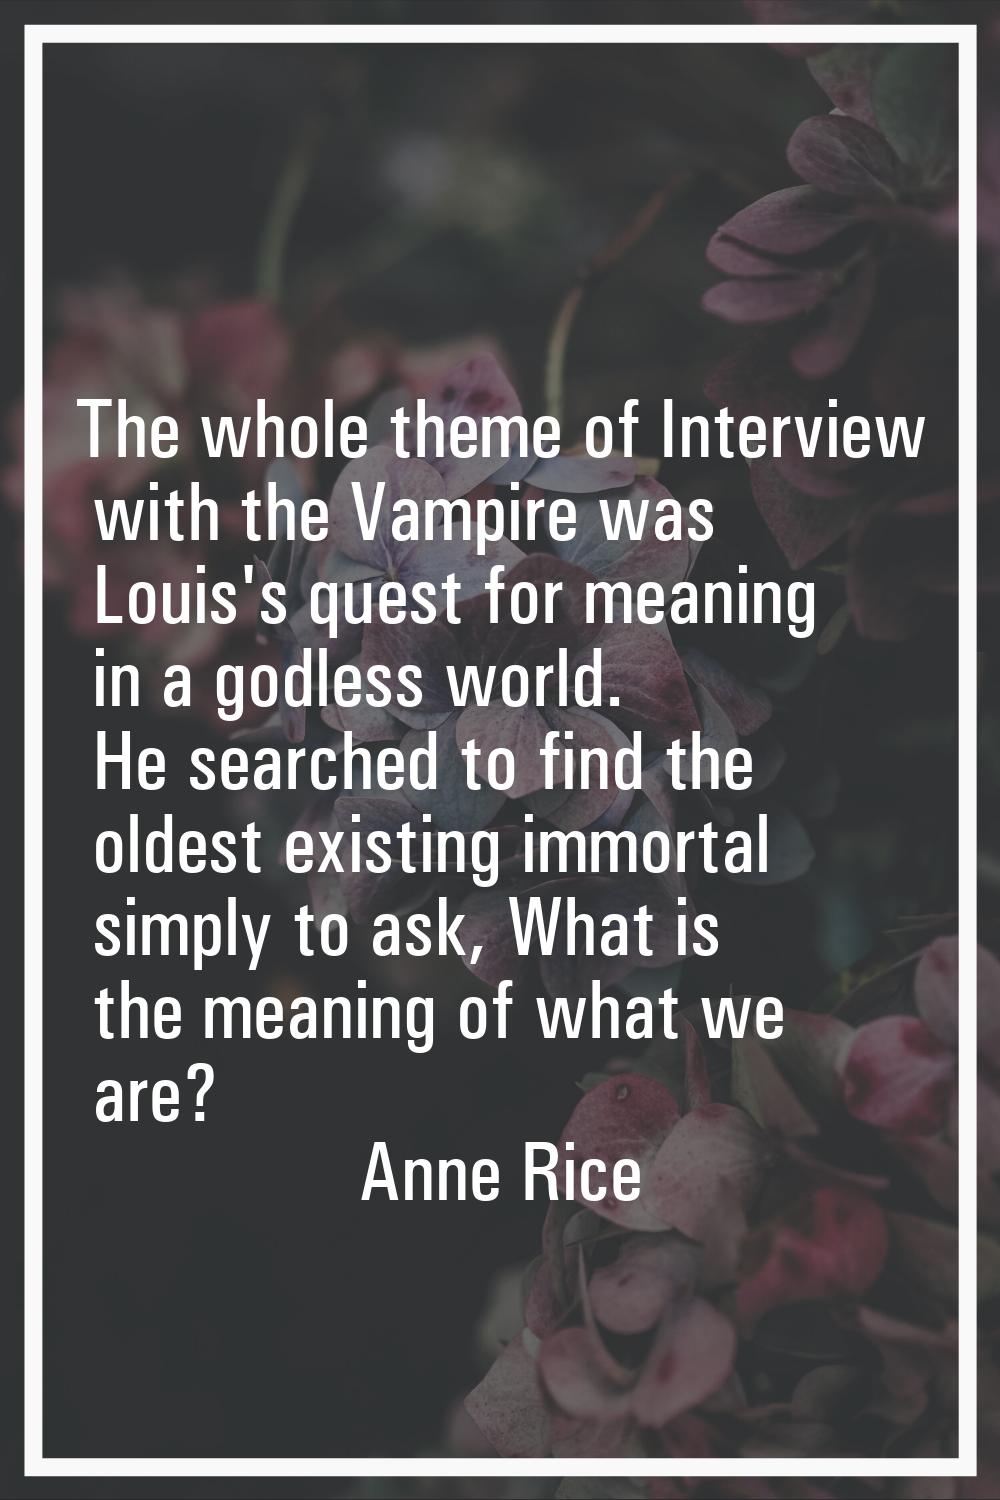 The whole theme of Interview with the Vampire was Louis's quest for meaning in a godless world. He 